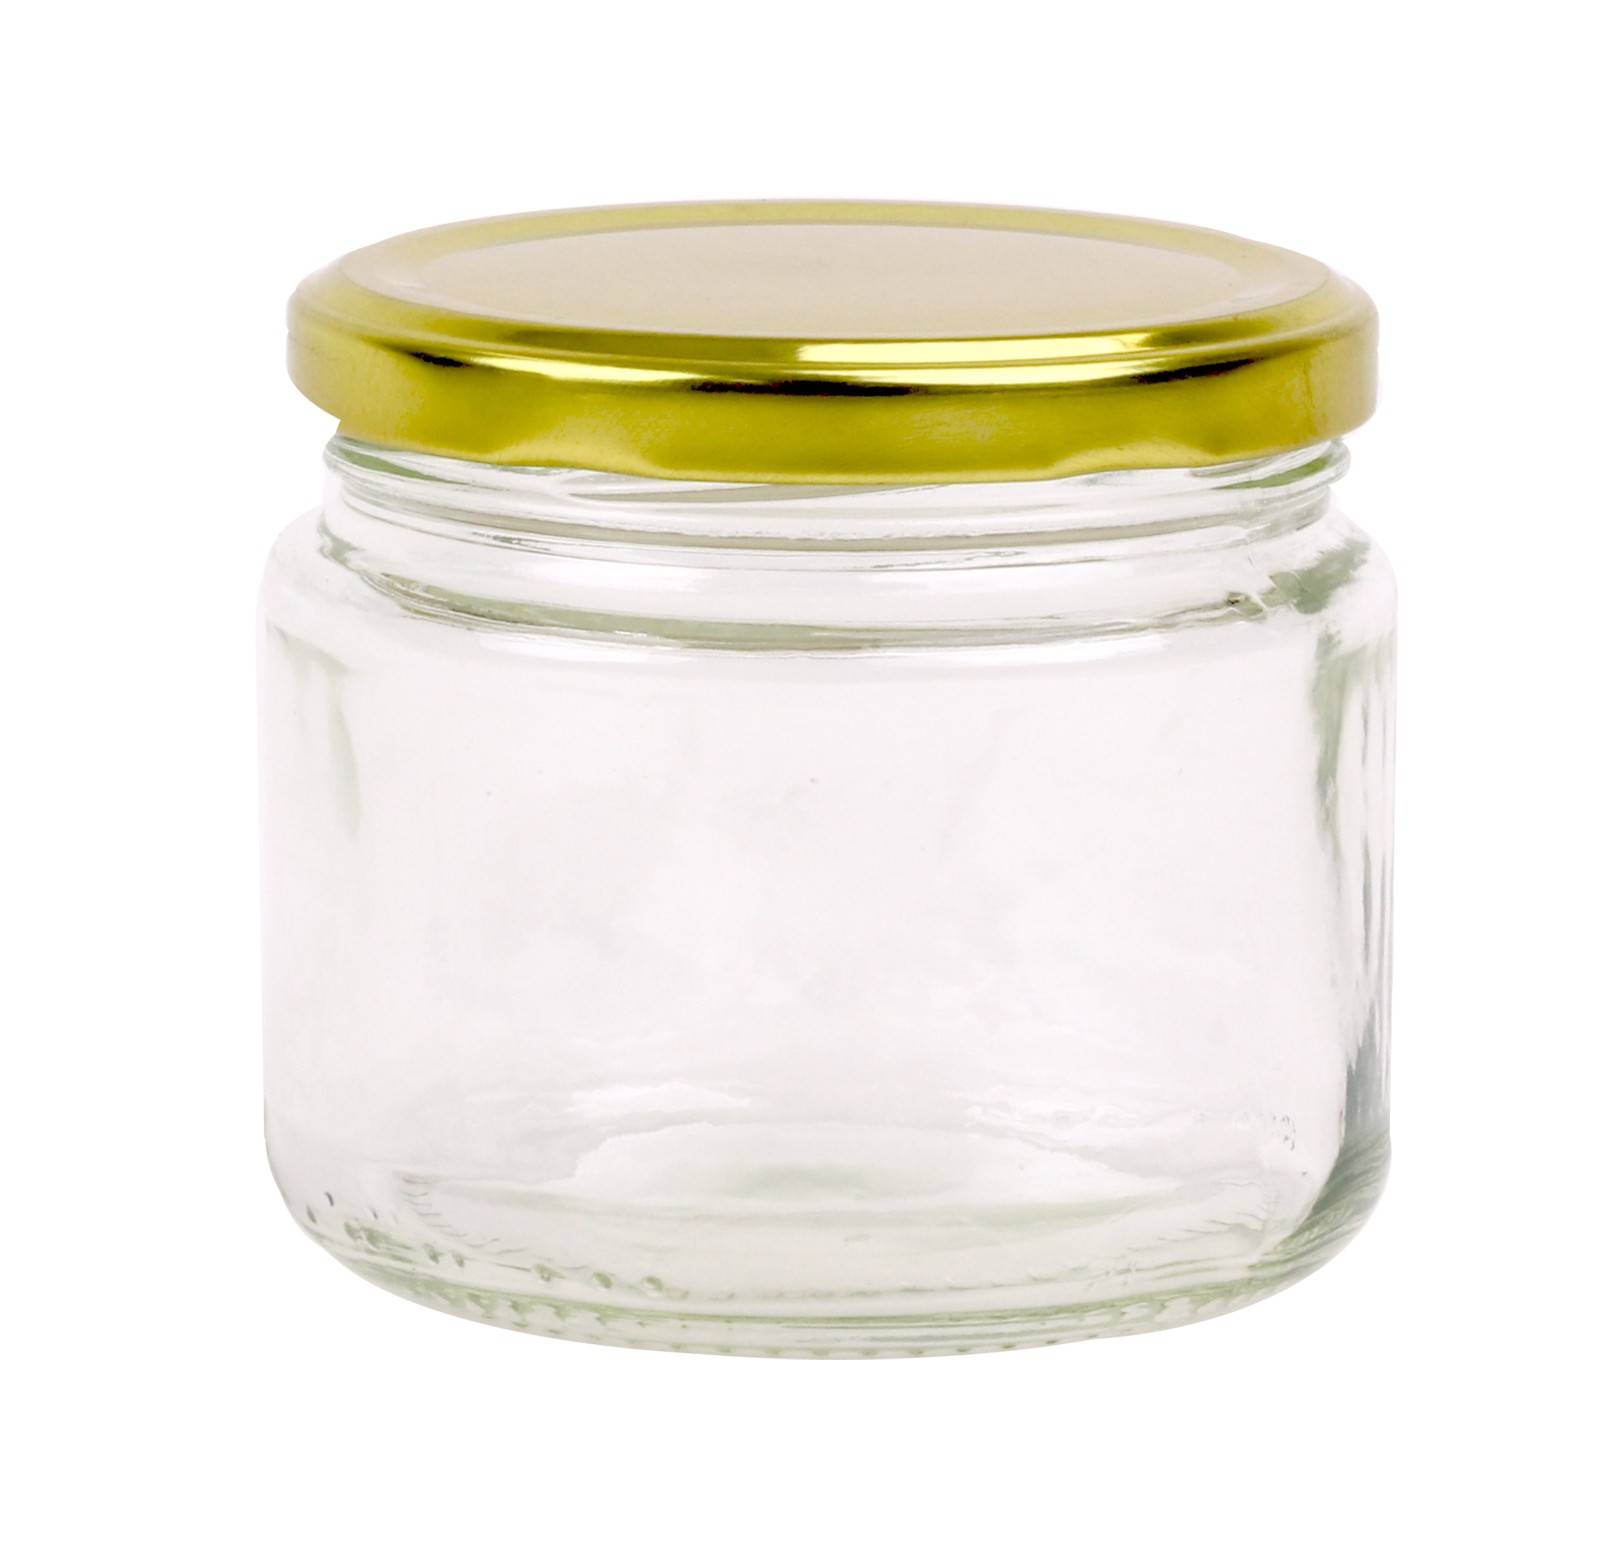 Round Glass Jars - 300ml / 420gm size - with Gold Lids